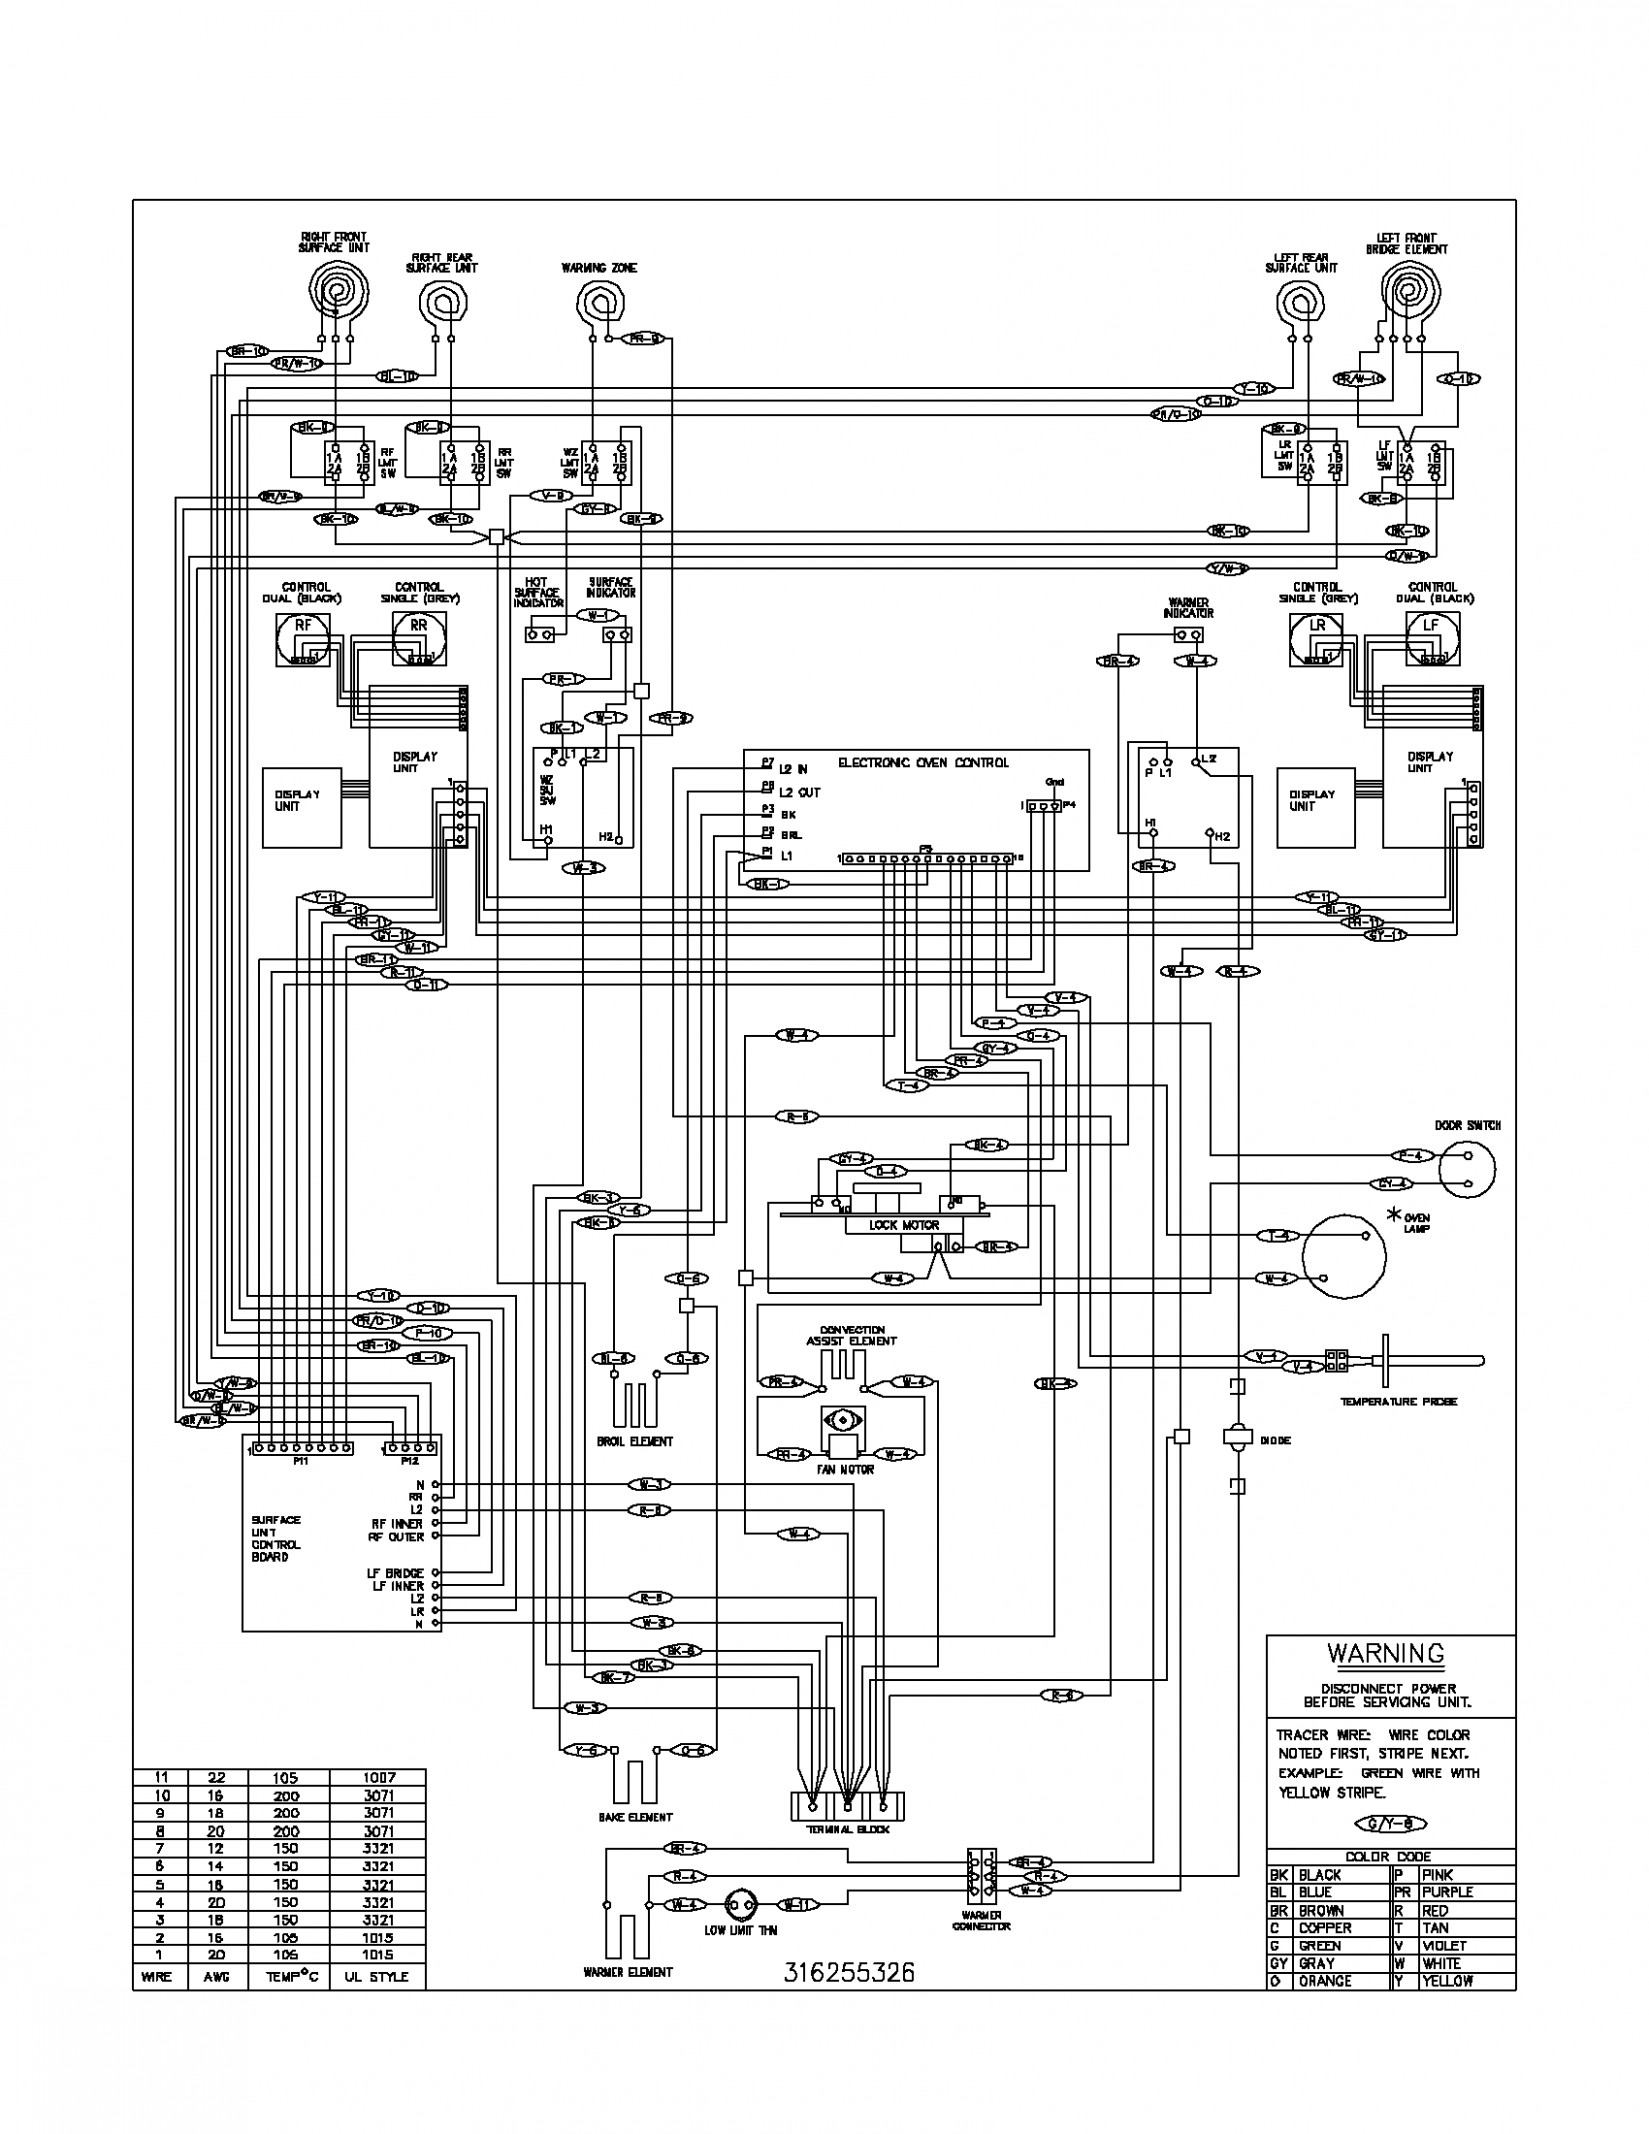 Wiring Diagram Coleman Mobile Home Electric Furnace Wiring